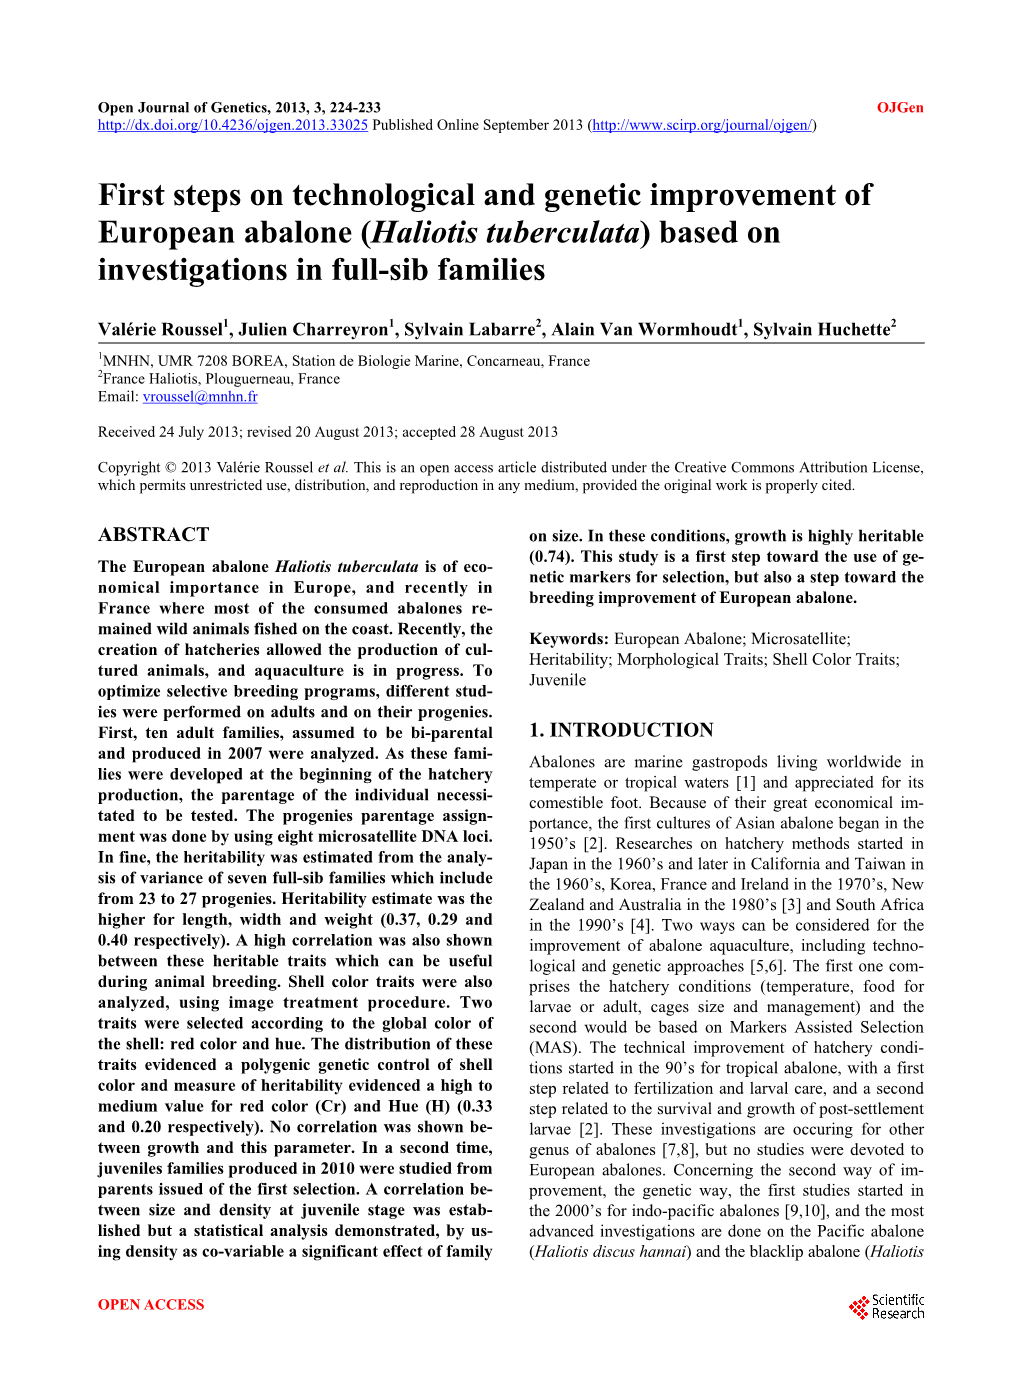 First Steps on Technological and Genetic Improvement of European Abalone (Haliotis Tuberculata) Based on Investigations in Full-Sib Families